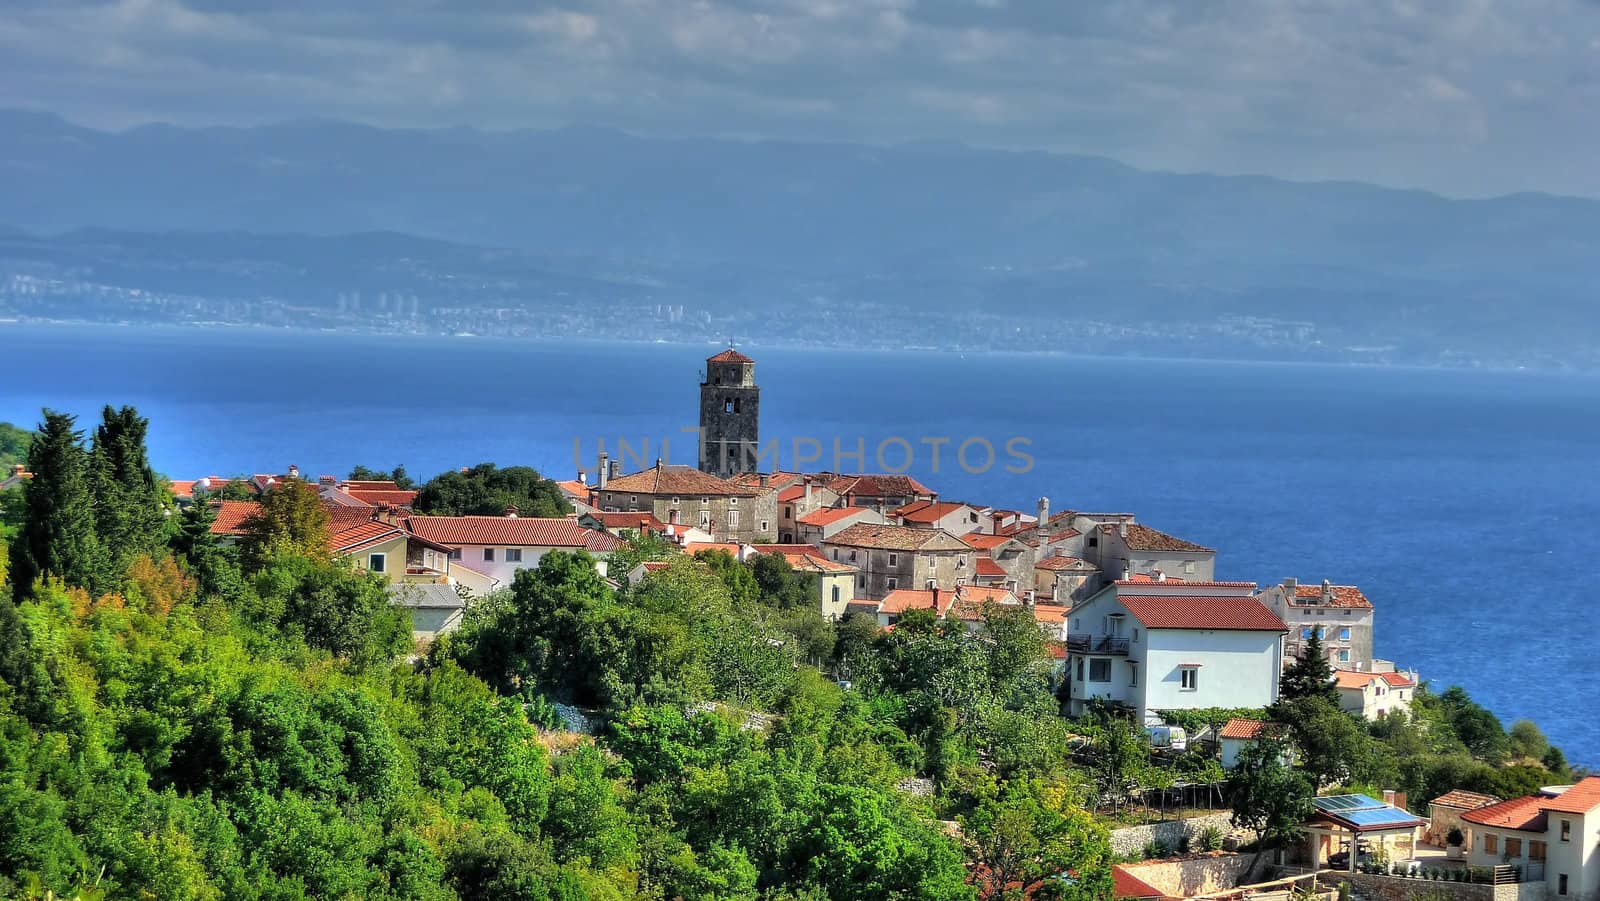 Adriatic Town of Brsec and Kvarner bay by xbrchx